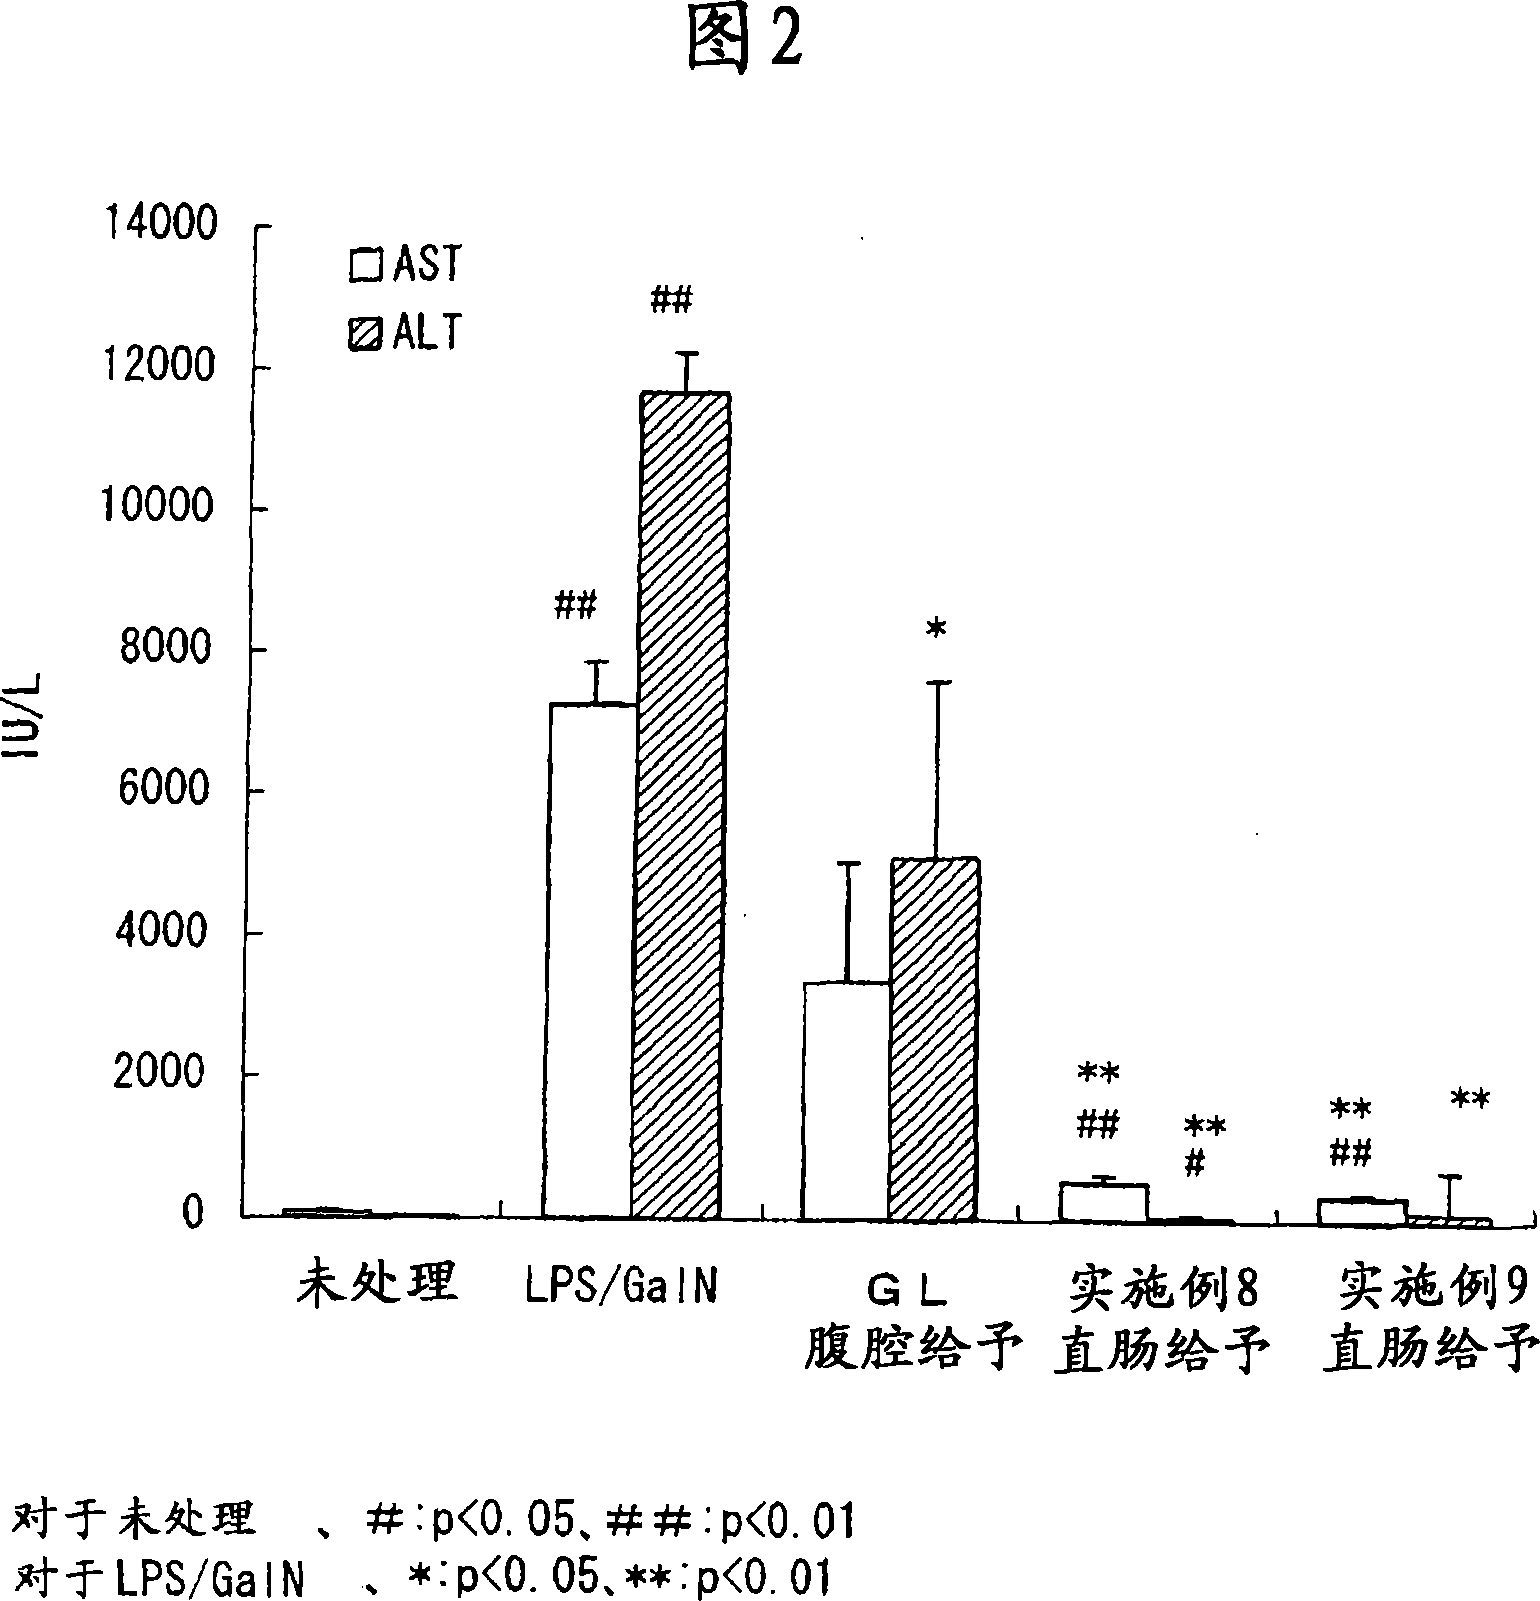 Glycyrrhizin-containing suppository compositions for rectal infusion